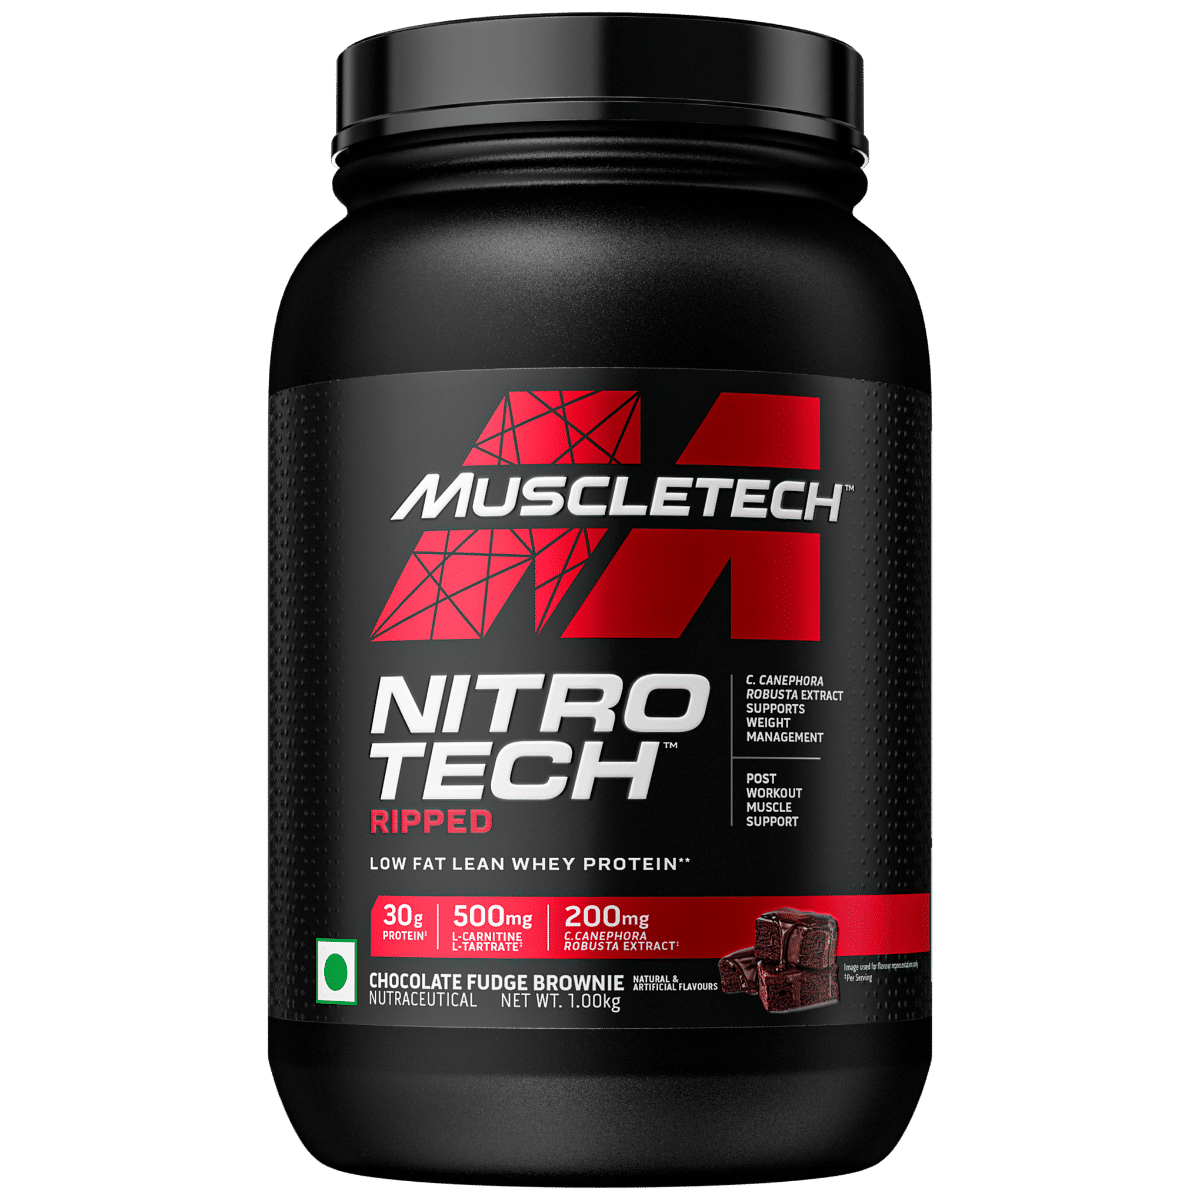 Muscletech Nitrotech Ripped Low Fat Whey Protein Chocolate Fudge Brownie Flavour Powder, 1 kg, Pack of 1 